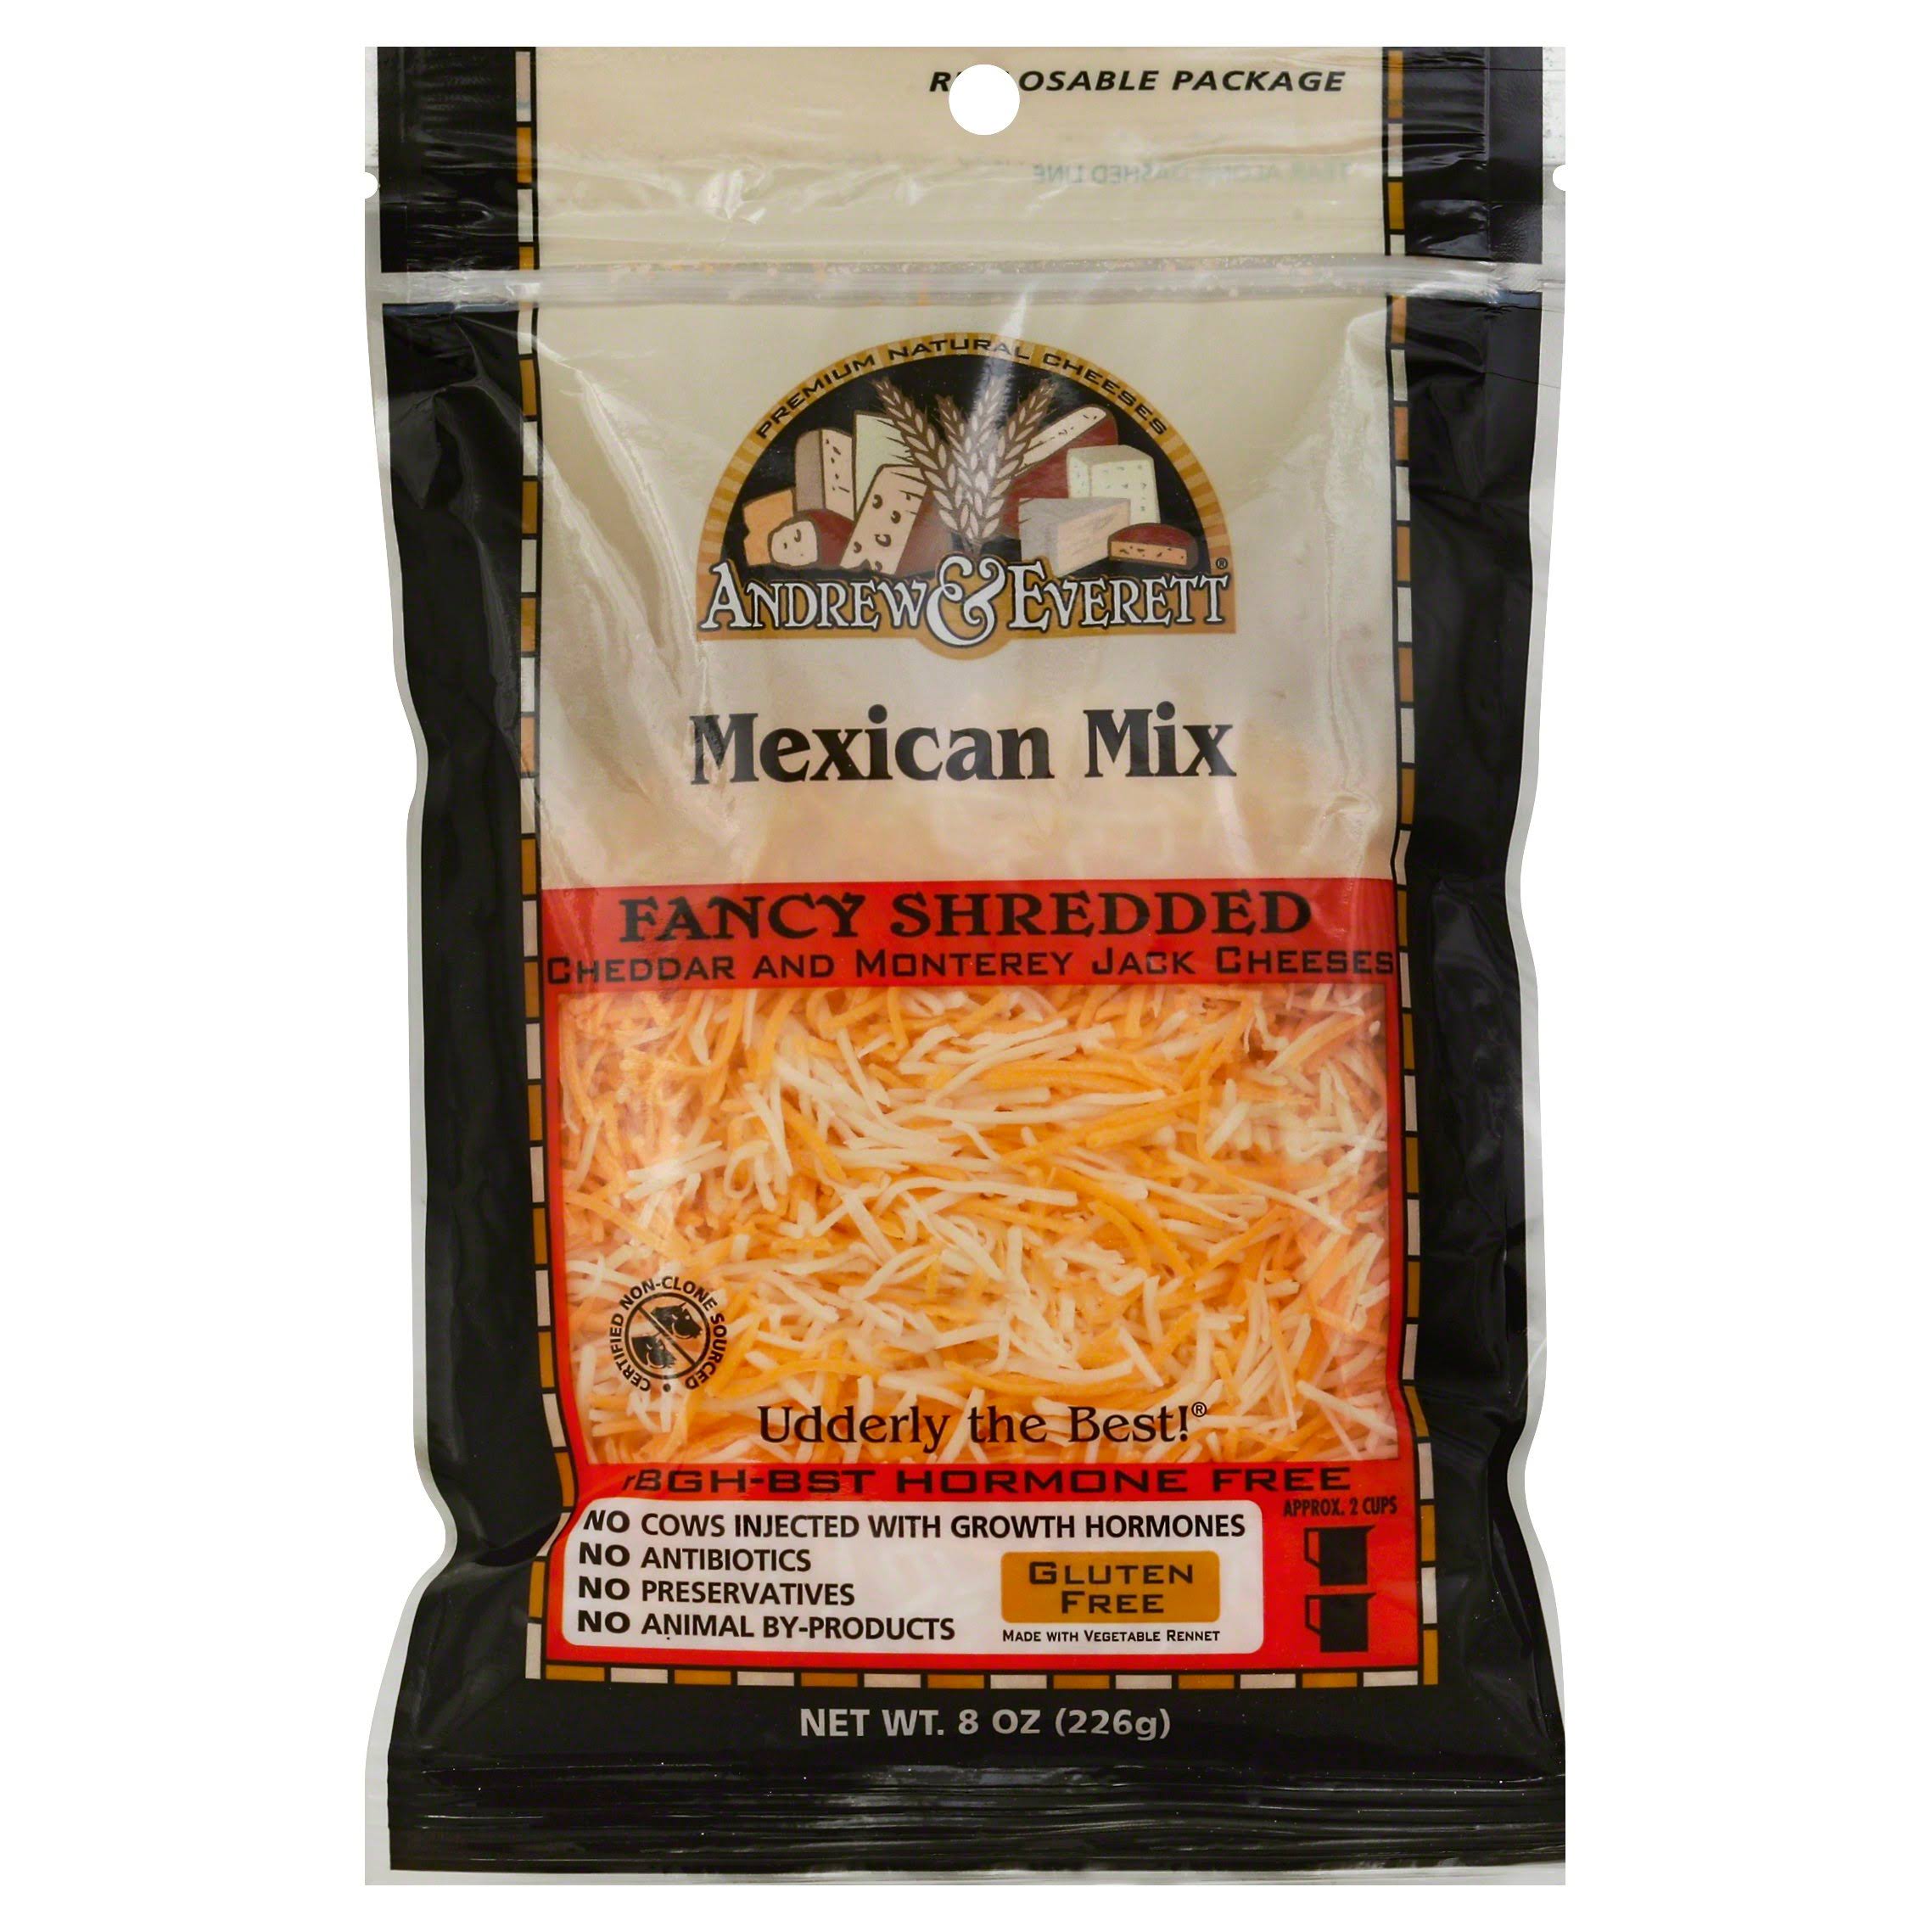 Andrew & Everett Cheese, Fancy Shredded, Mexican Mix - 8 oz